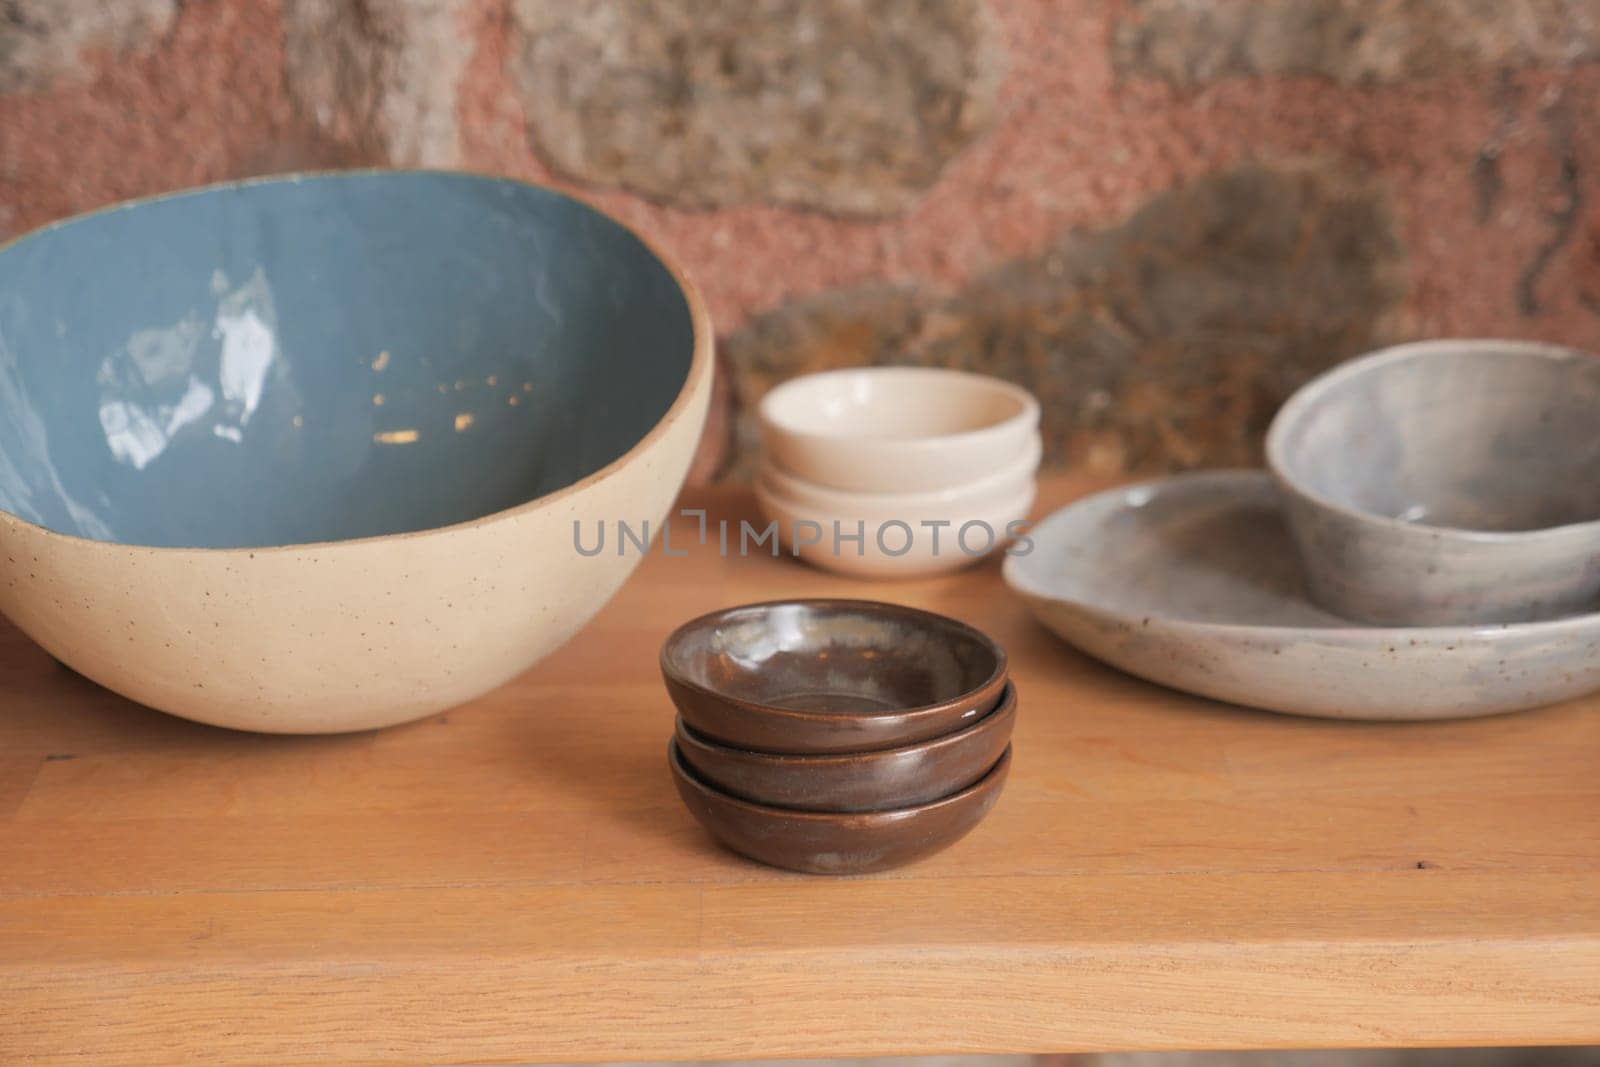 Rustic ceramic bowls and plates arranged on a wooden shelf, set against a stone wall in a kitchen or home interior